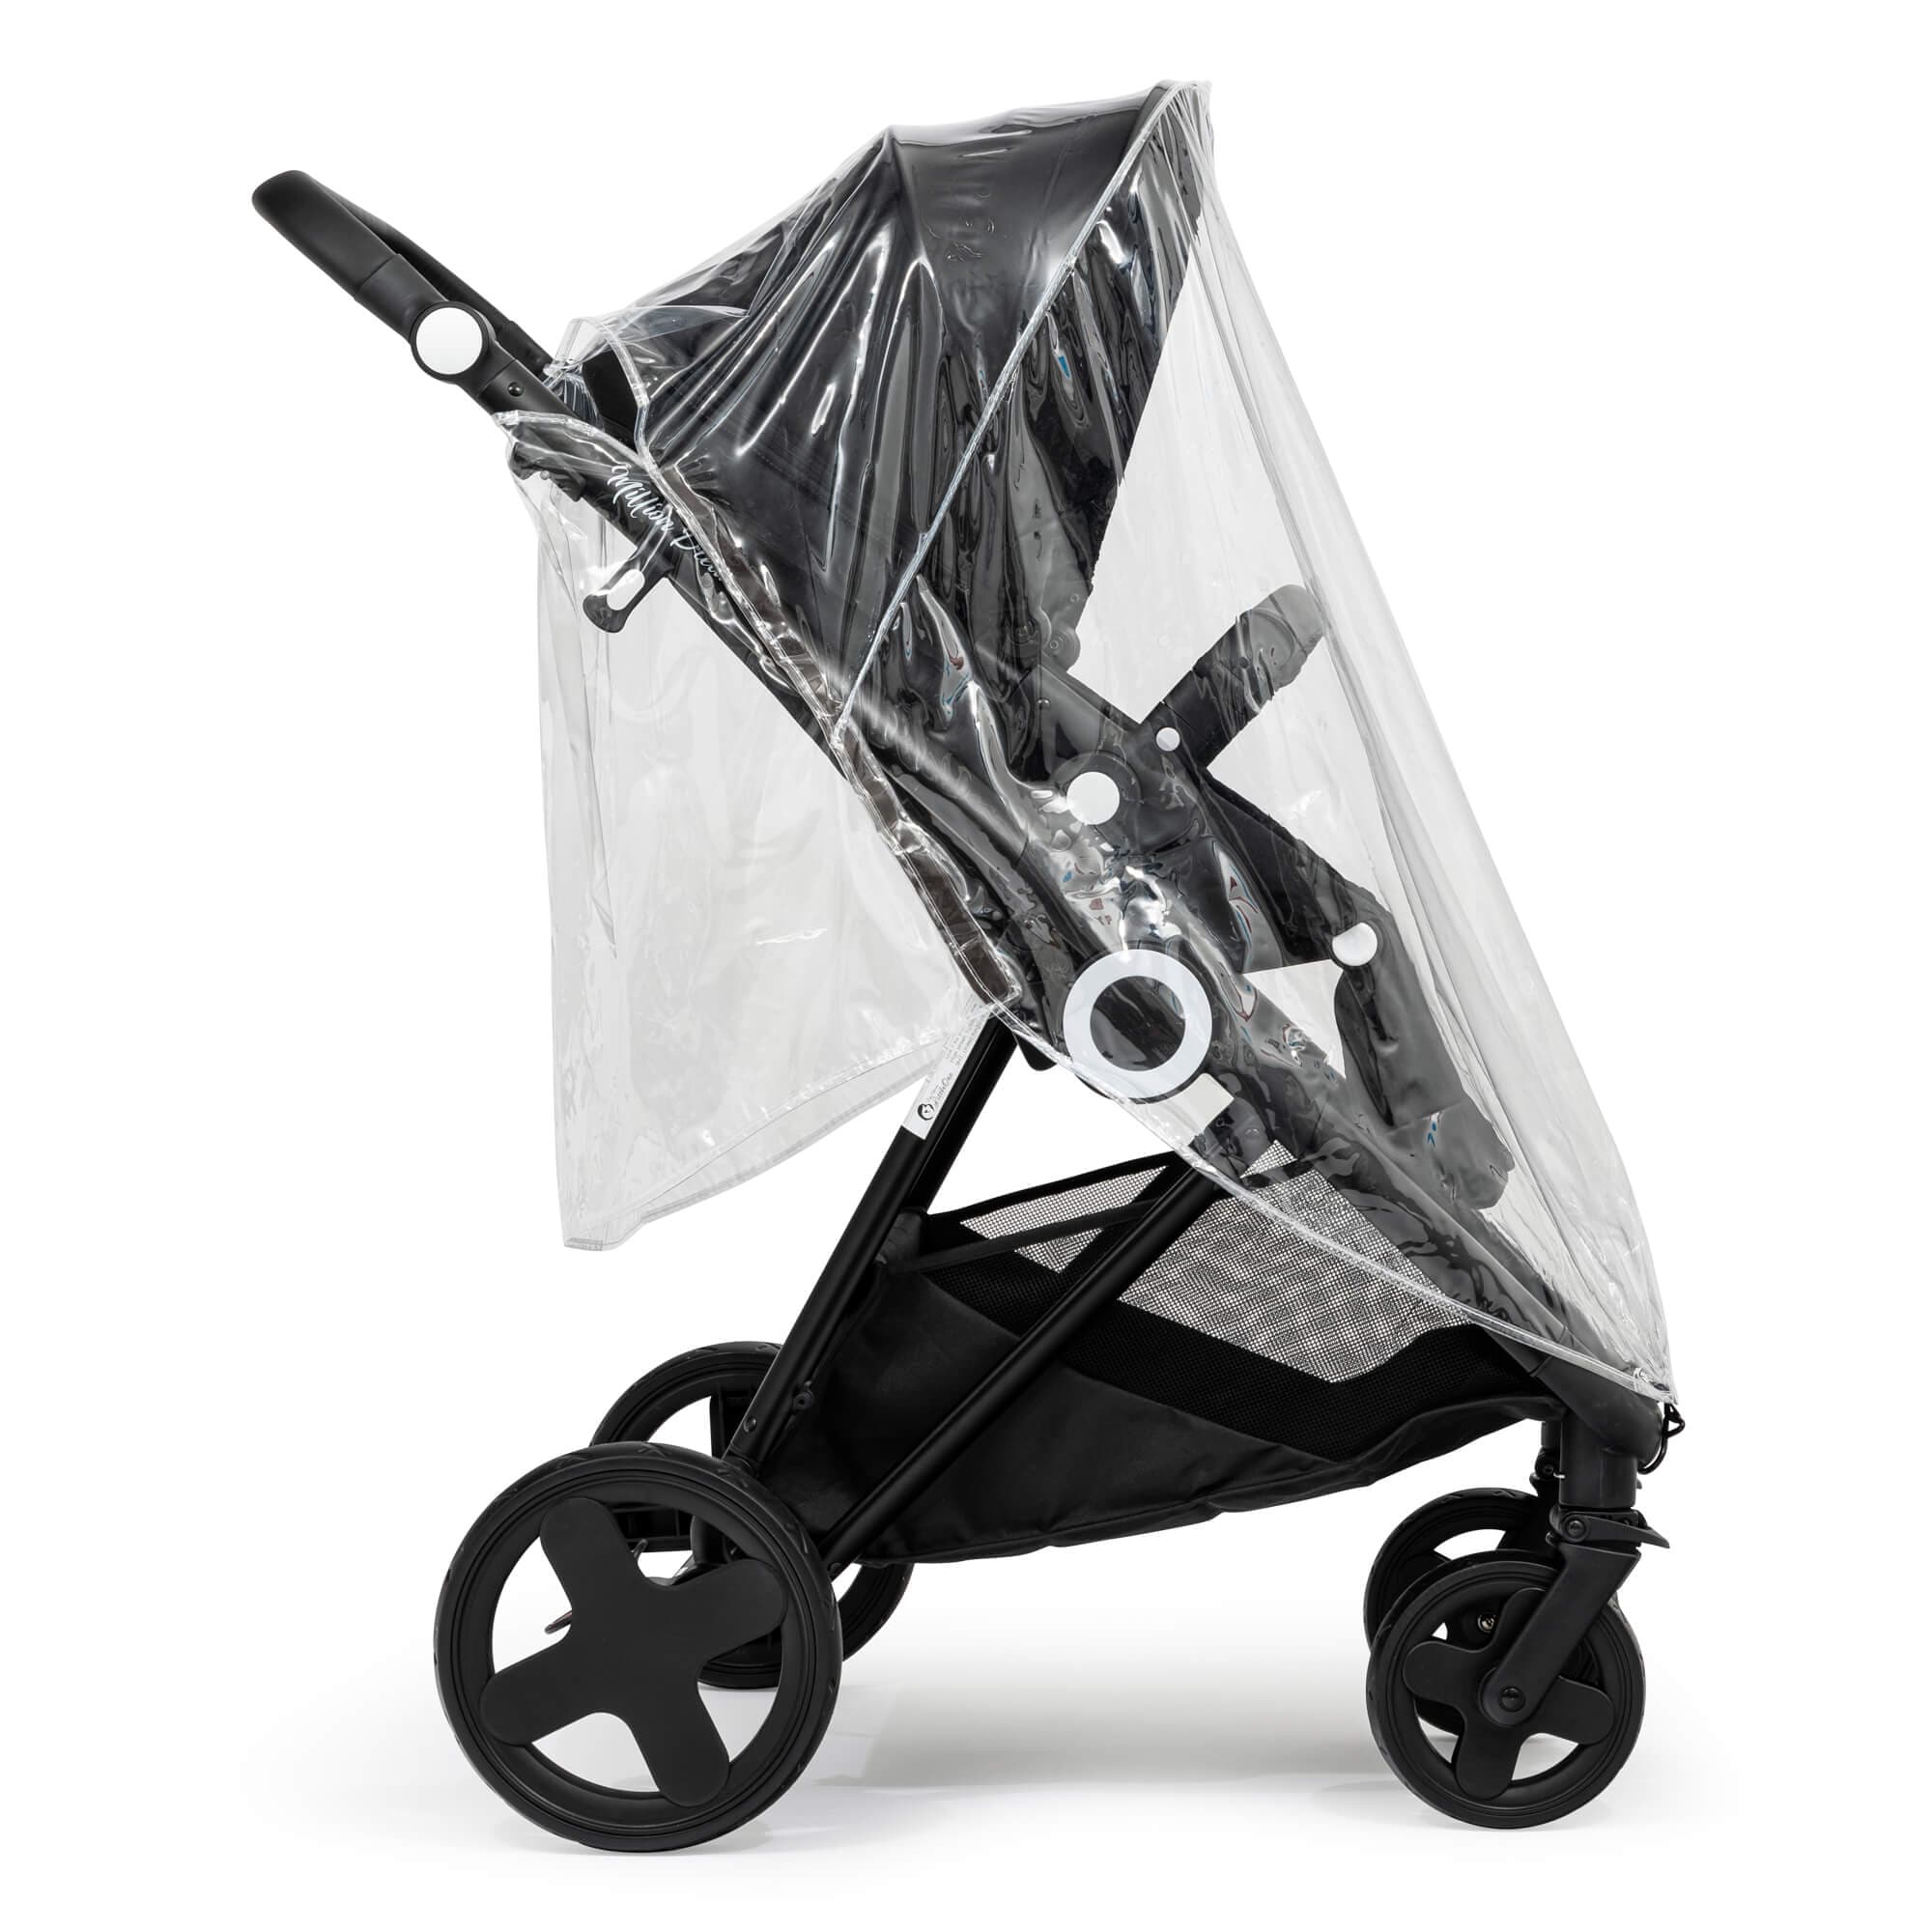 Pushchair Raincover Compatible With Brio - For Your Little One